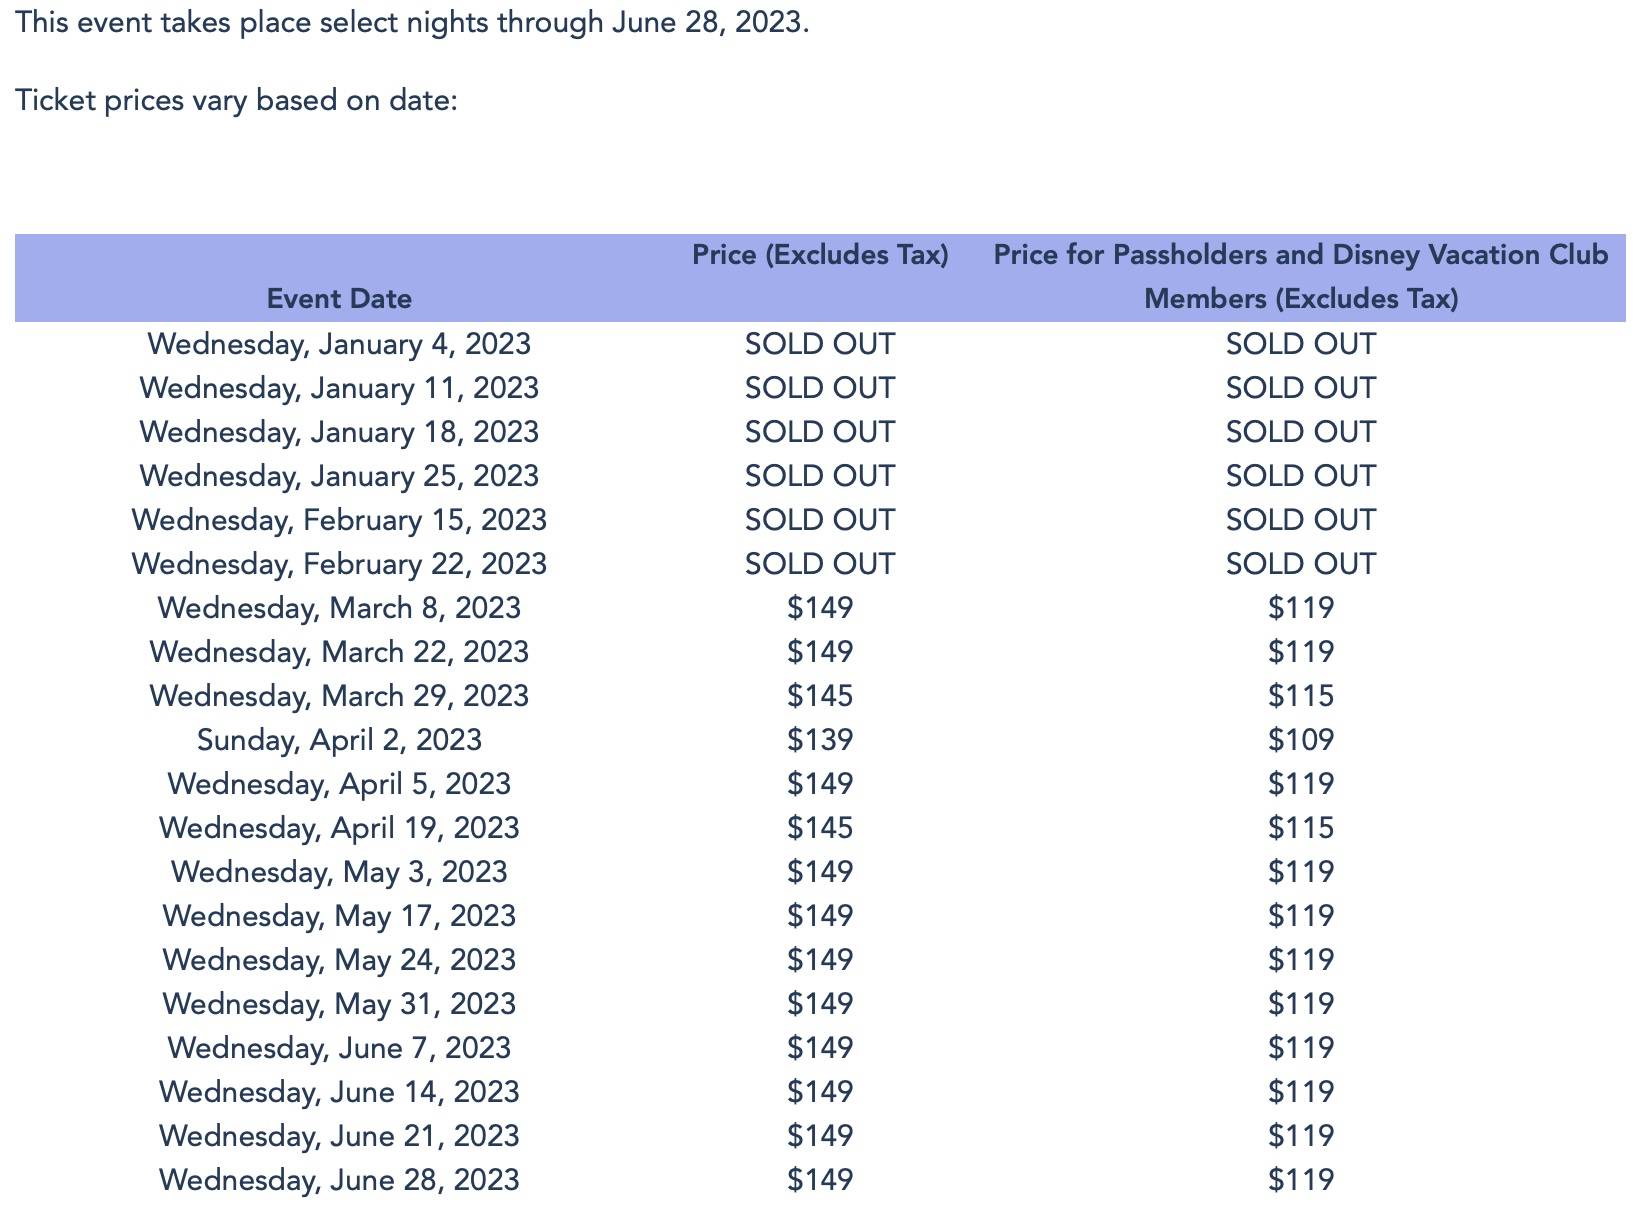 Disney After Hours at Disney's Hollywood Studios dates and pricing